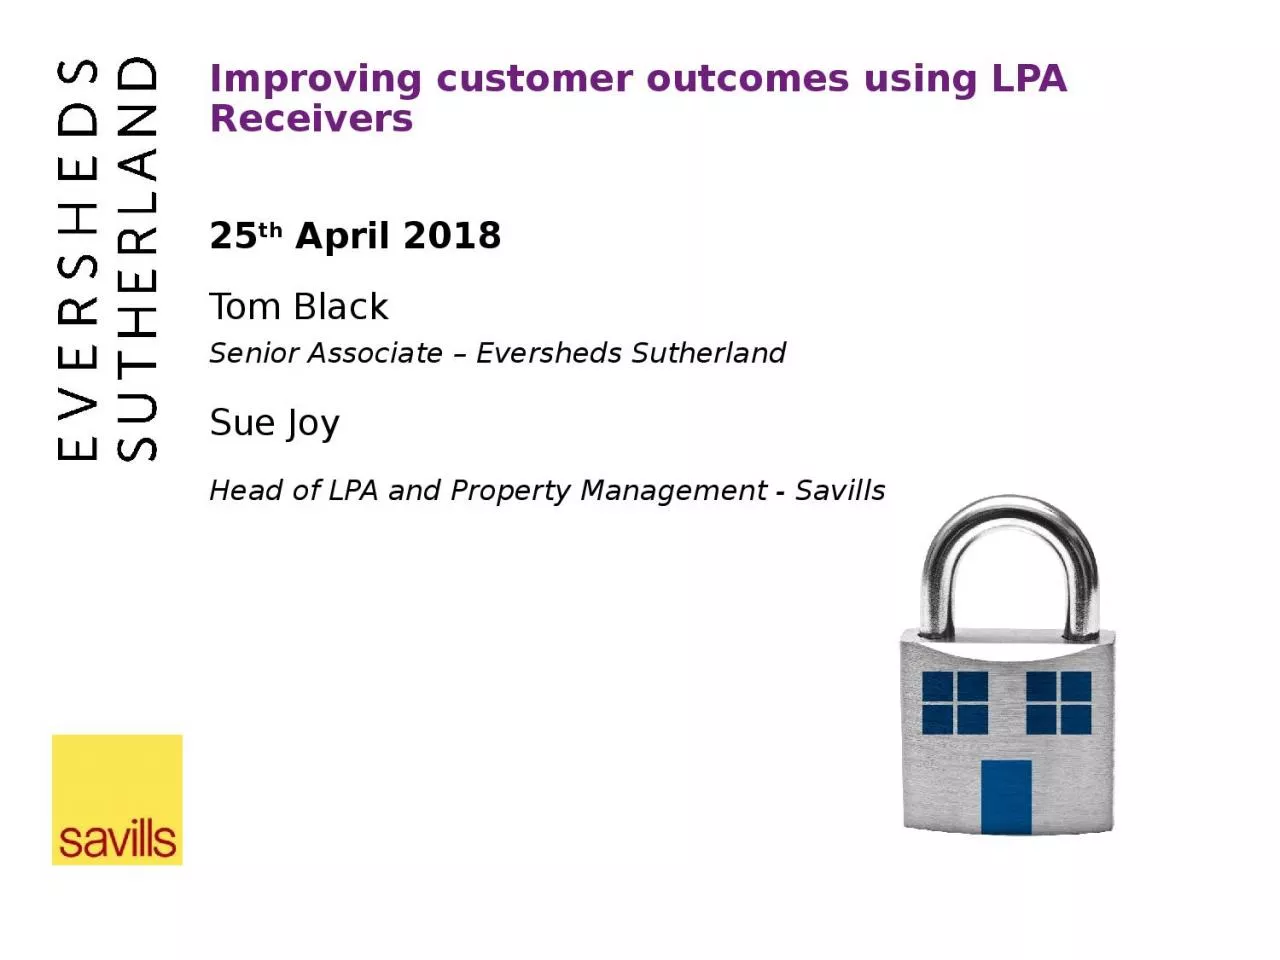 Improving customer outcomes using LPA Receivers